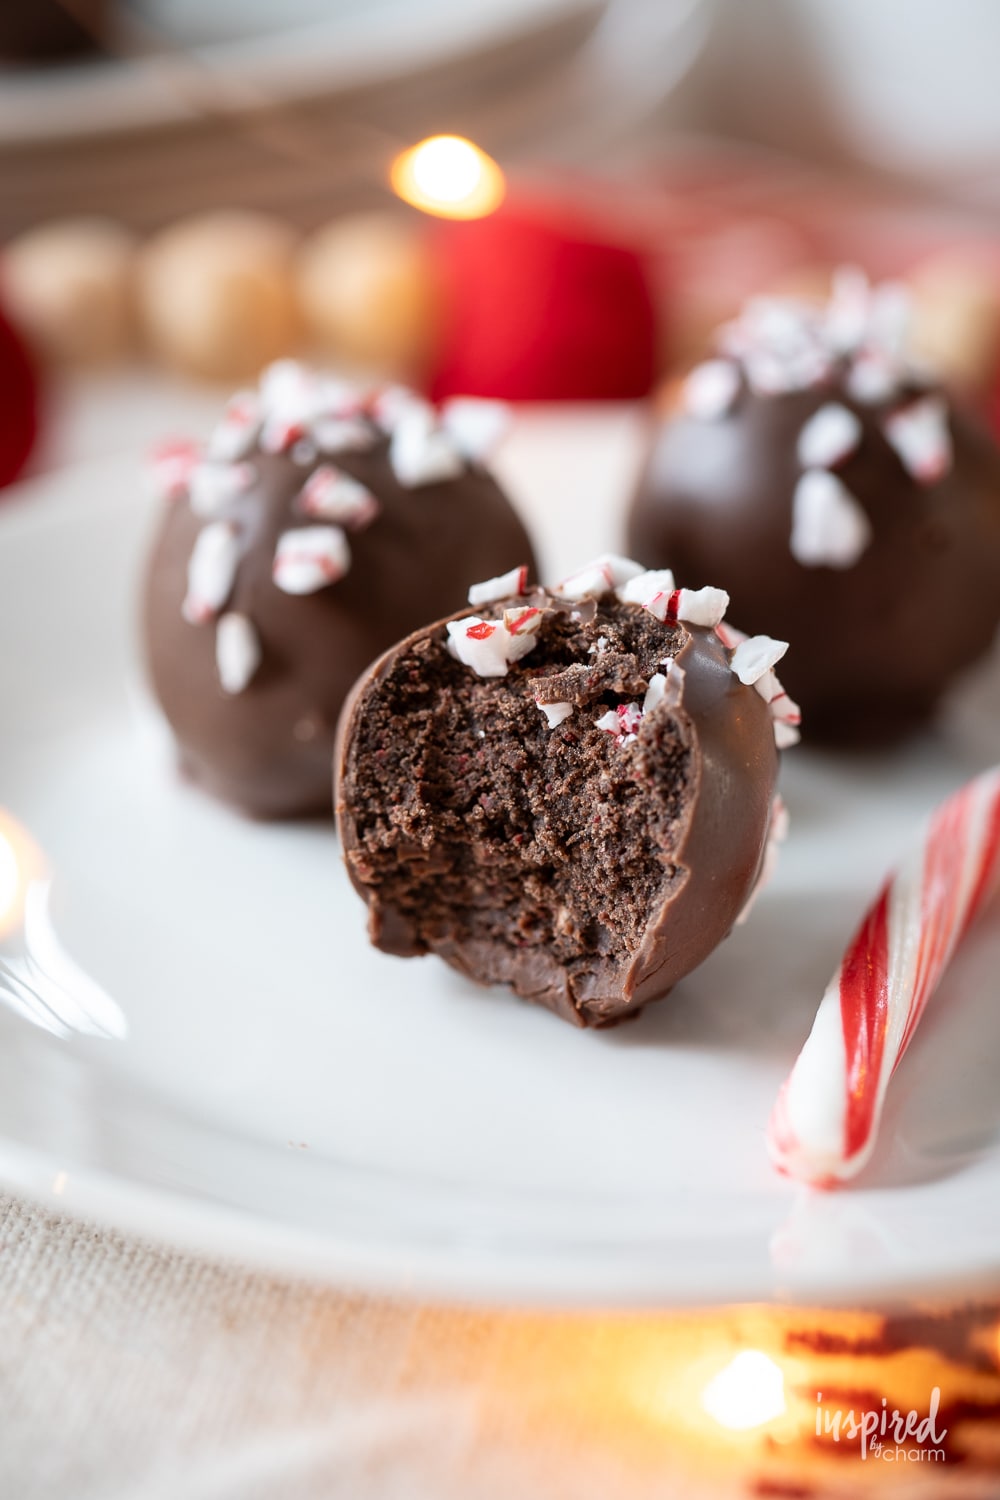 peppermint Oreo truffle with one that has a bite taken out.